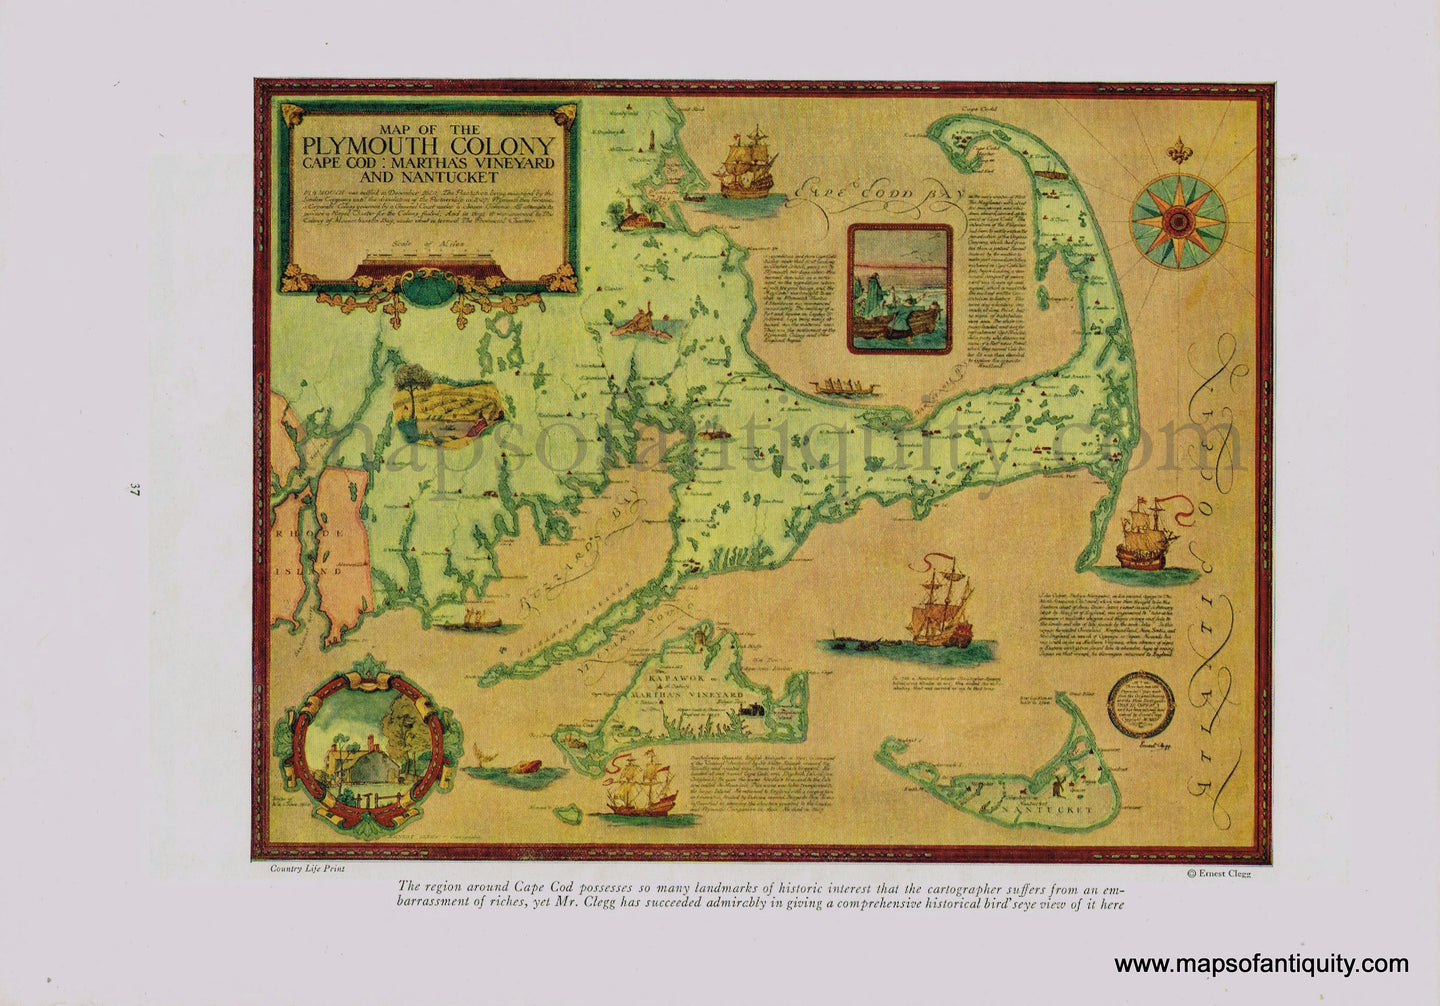 Antique-Printed-Color-Map-Map-of-the-Plymouth-Colony-Cape-Cod-:-Martha's-Vineyard-and-Nantucket-VERSO:-The-Coast-of-Maine-and-Mount-Desert-Island-1925-Clegg/Country-Life-Magazine-Northeast-New-England-1800s-19th-century-Maps-of-Antiquity